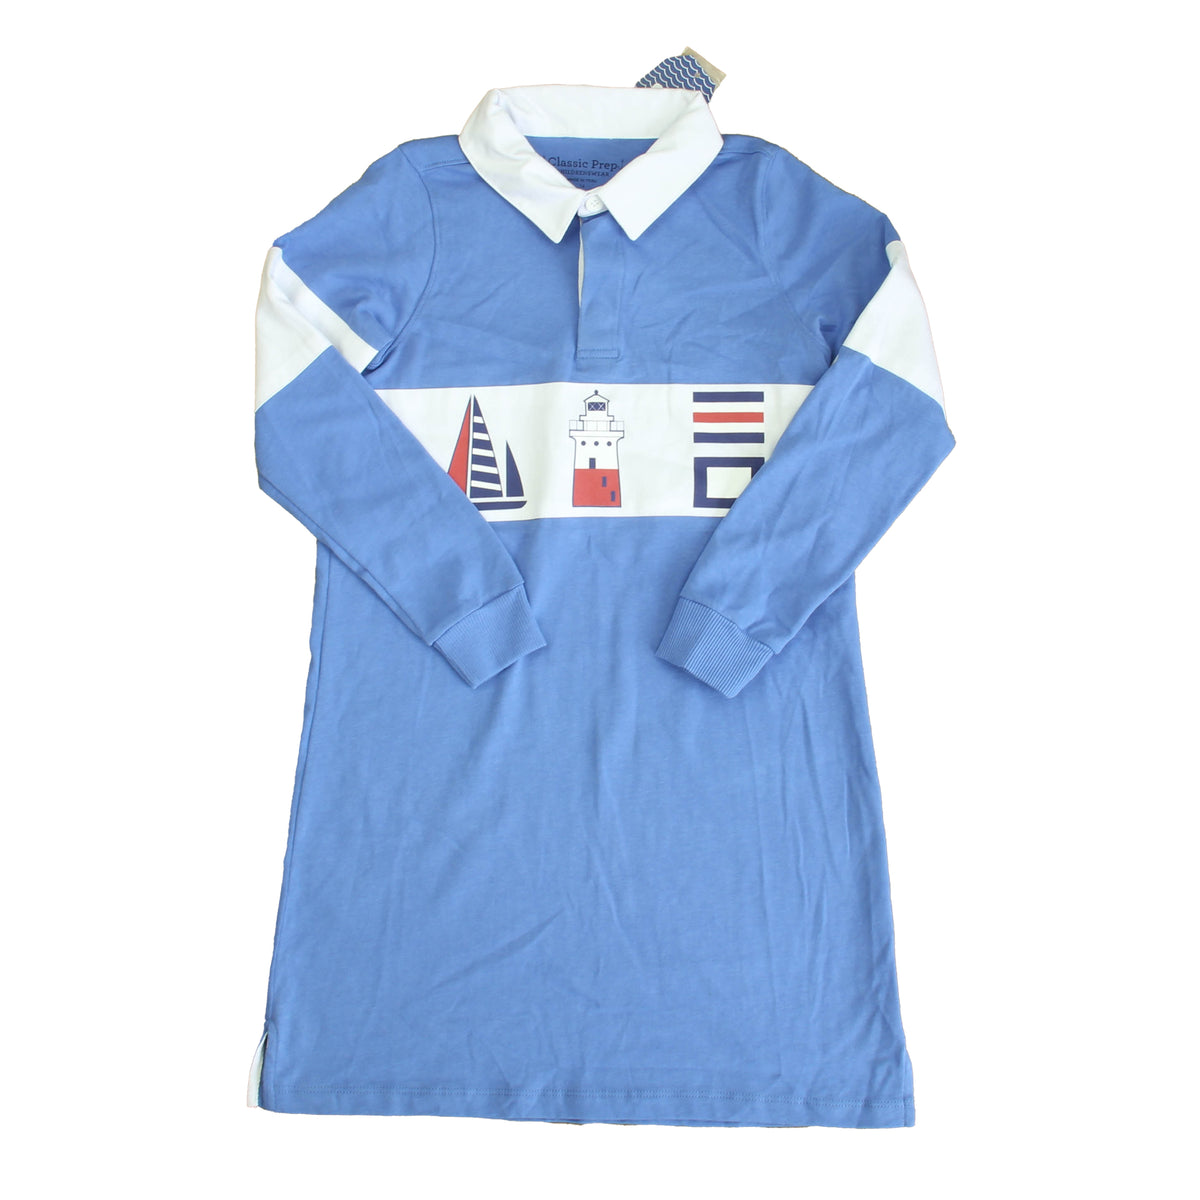 New with Tags: Blue | White | Red Sailboats Dress size: 6-14 Years -- FINAL SALE